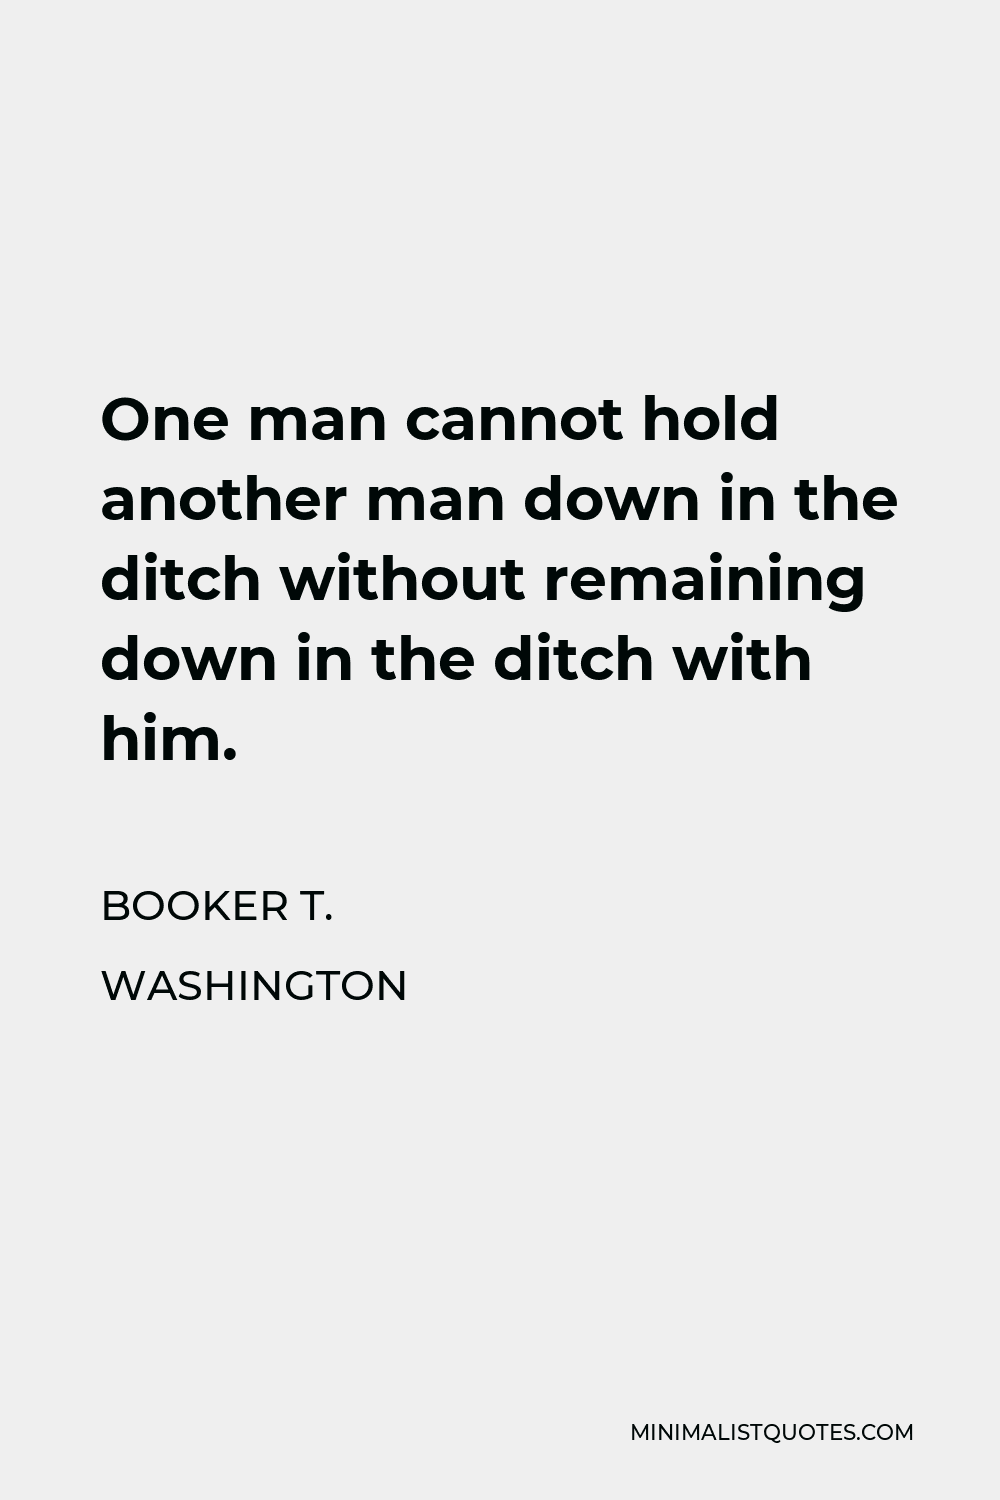 Booker T. Washington Quote - One man cannot hold another man down in the ditch without remaining down in the ditch with him.